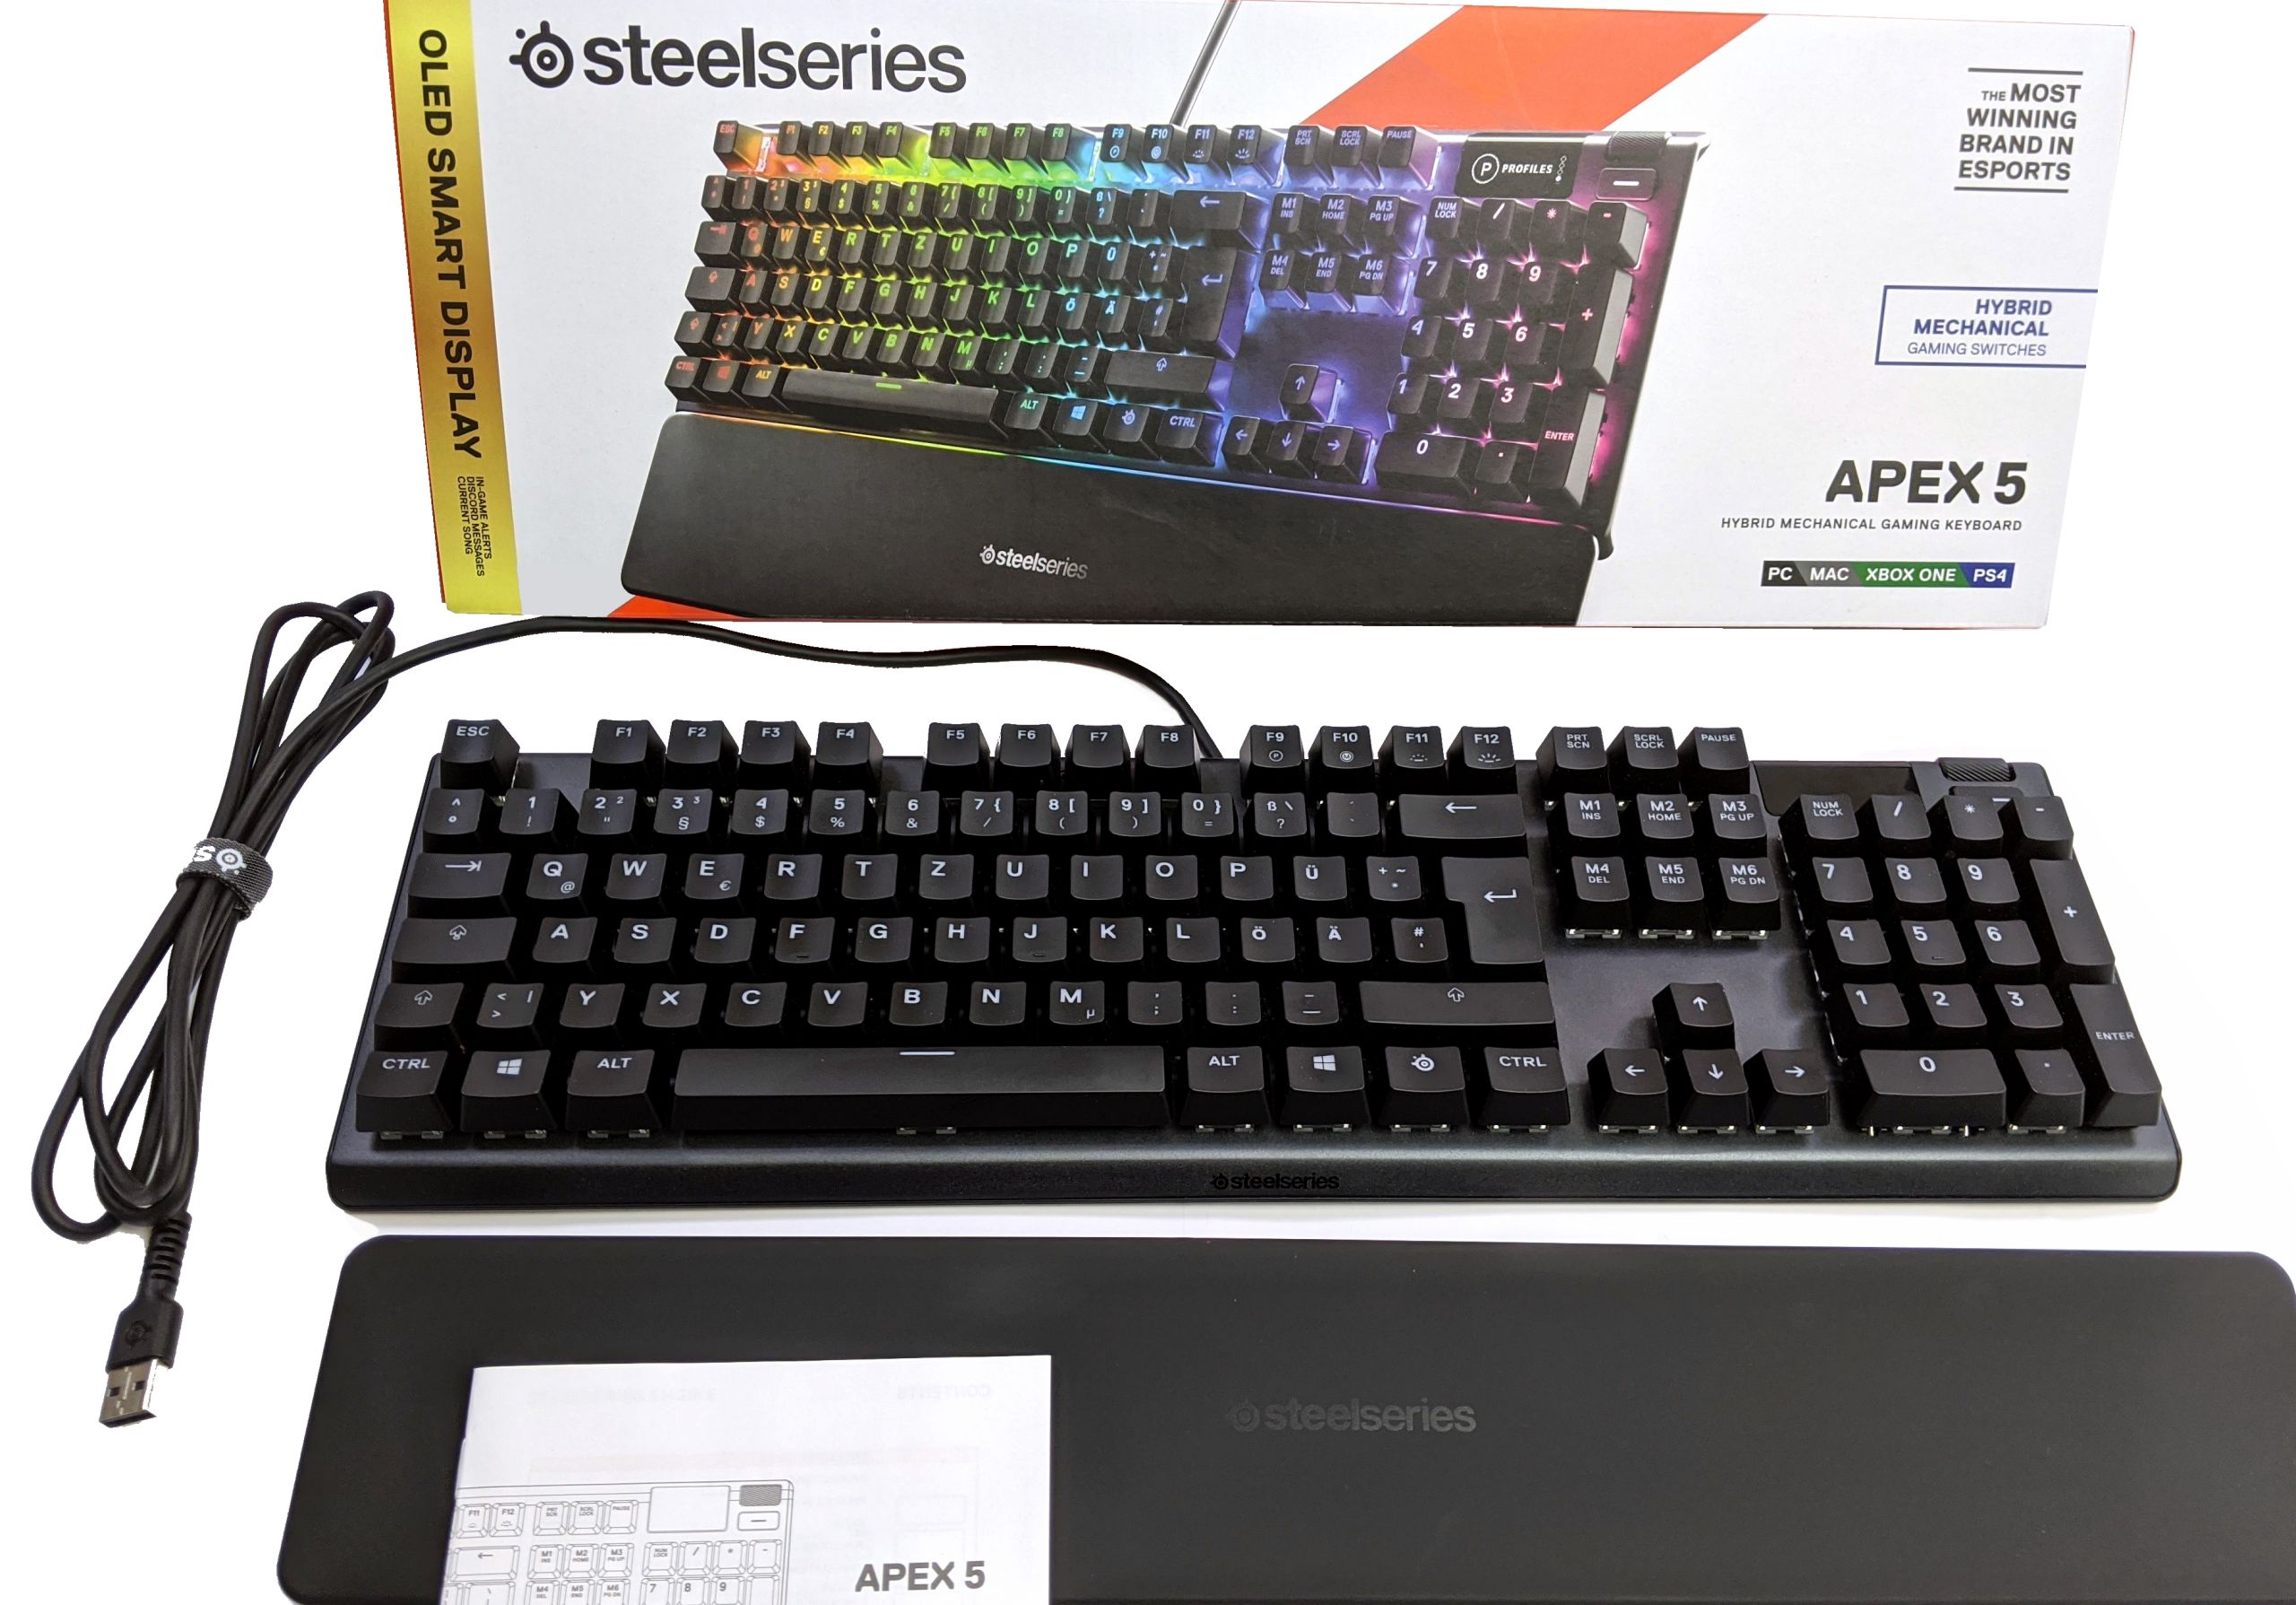 Steelseries Apex 5 in review: mechanical gaming keyboard with many features  | igor´sLAB